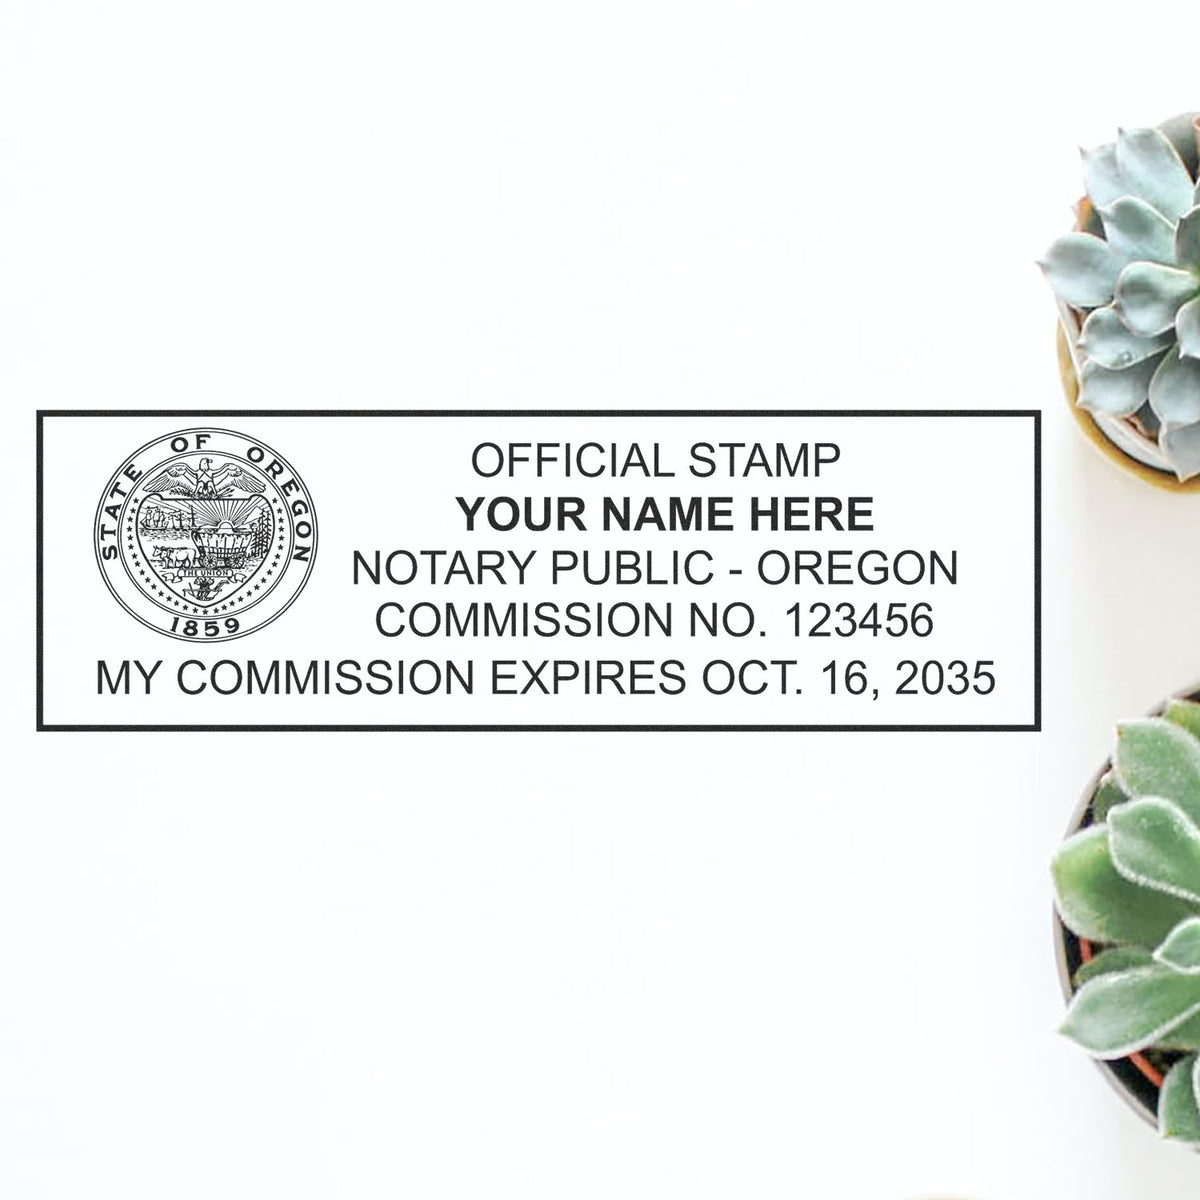 A stamped impression of the PSI Oregon Notary Stamp in this stylish lifestyle photo, setting the tone for a unique and personalized product.